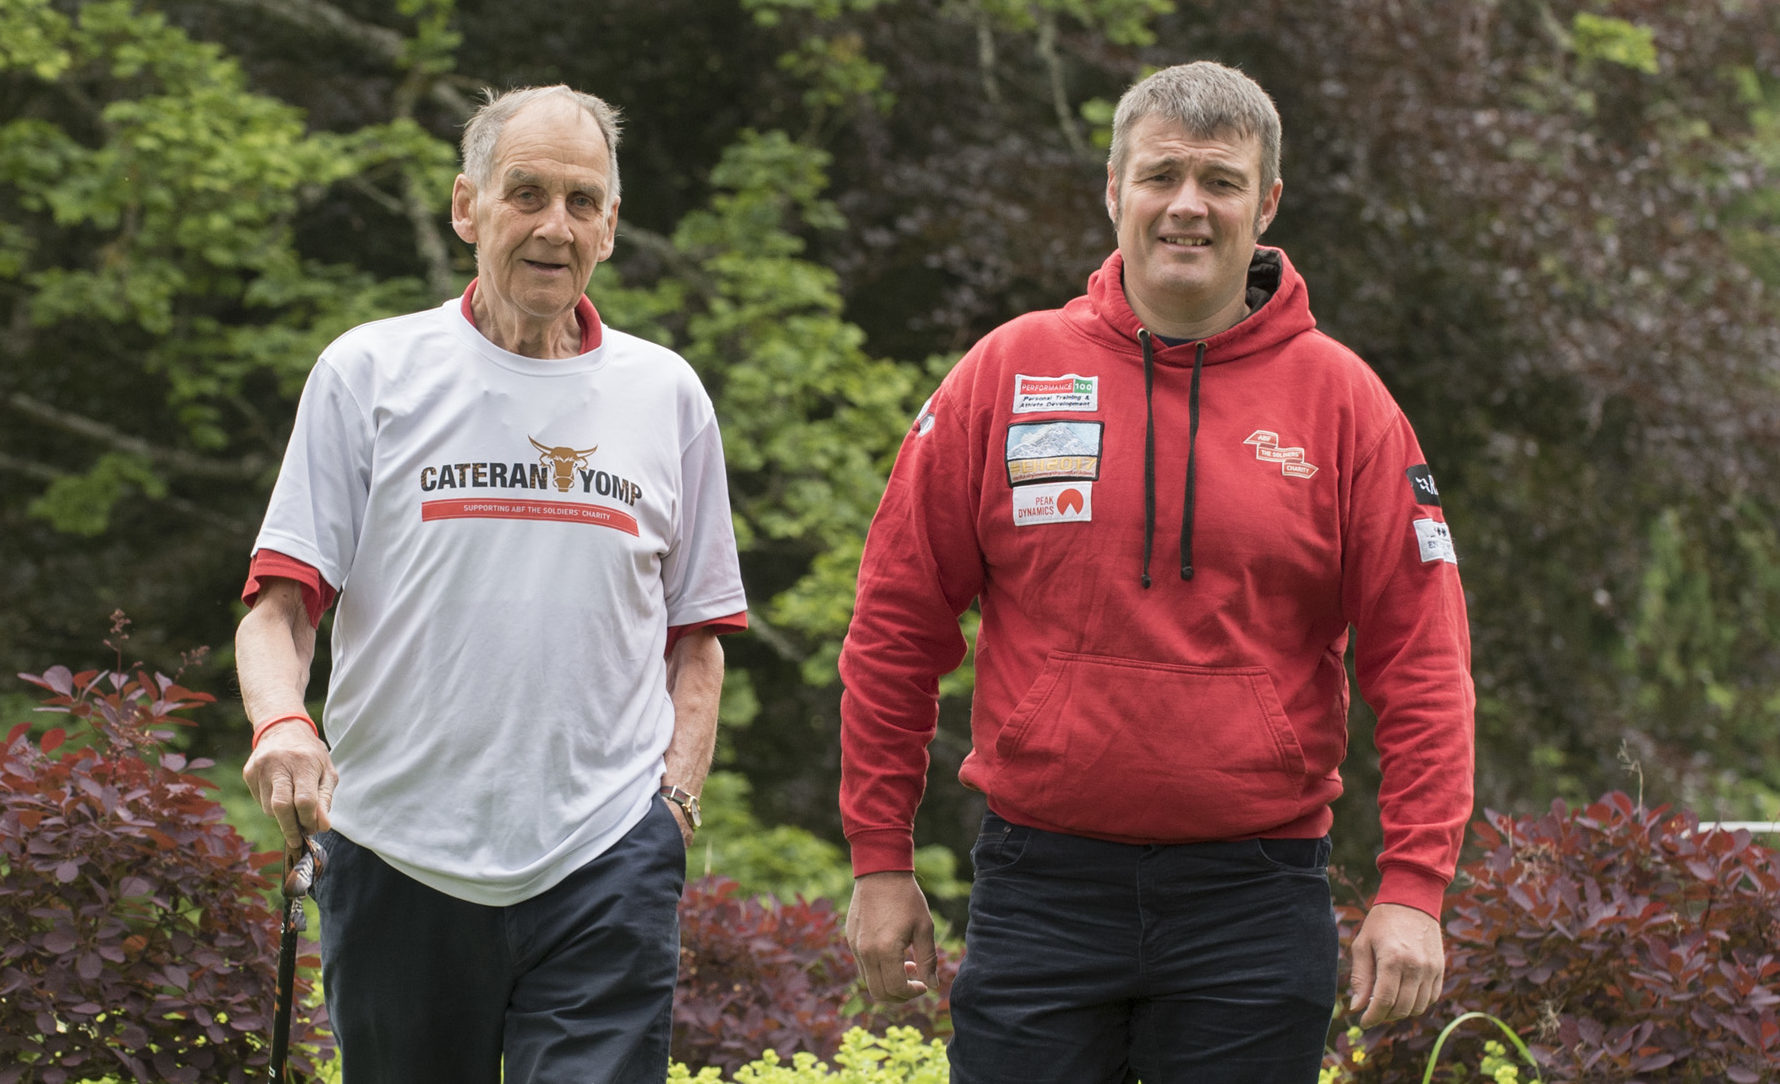 Major Andrew Wedderburn, the Yomp's oldest participant at 84 years old, with Yomp 2018 ambassador Les Binns.